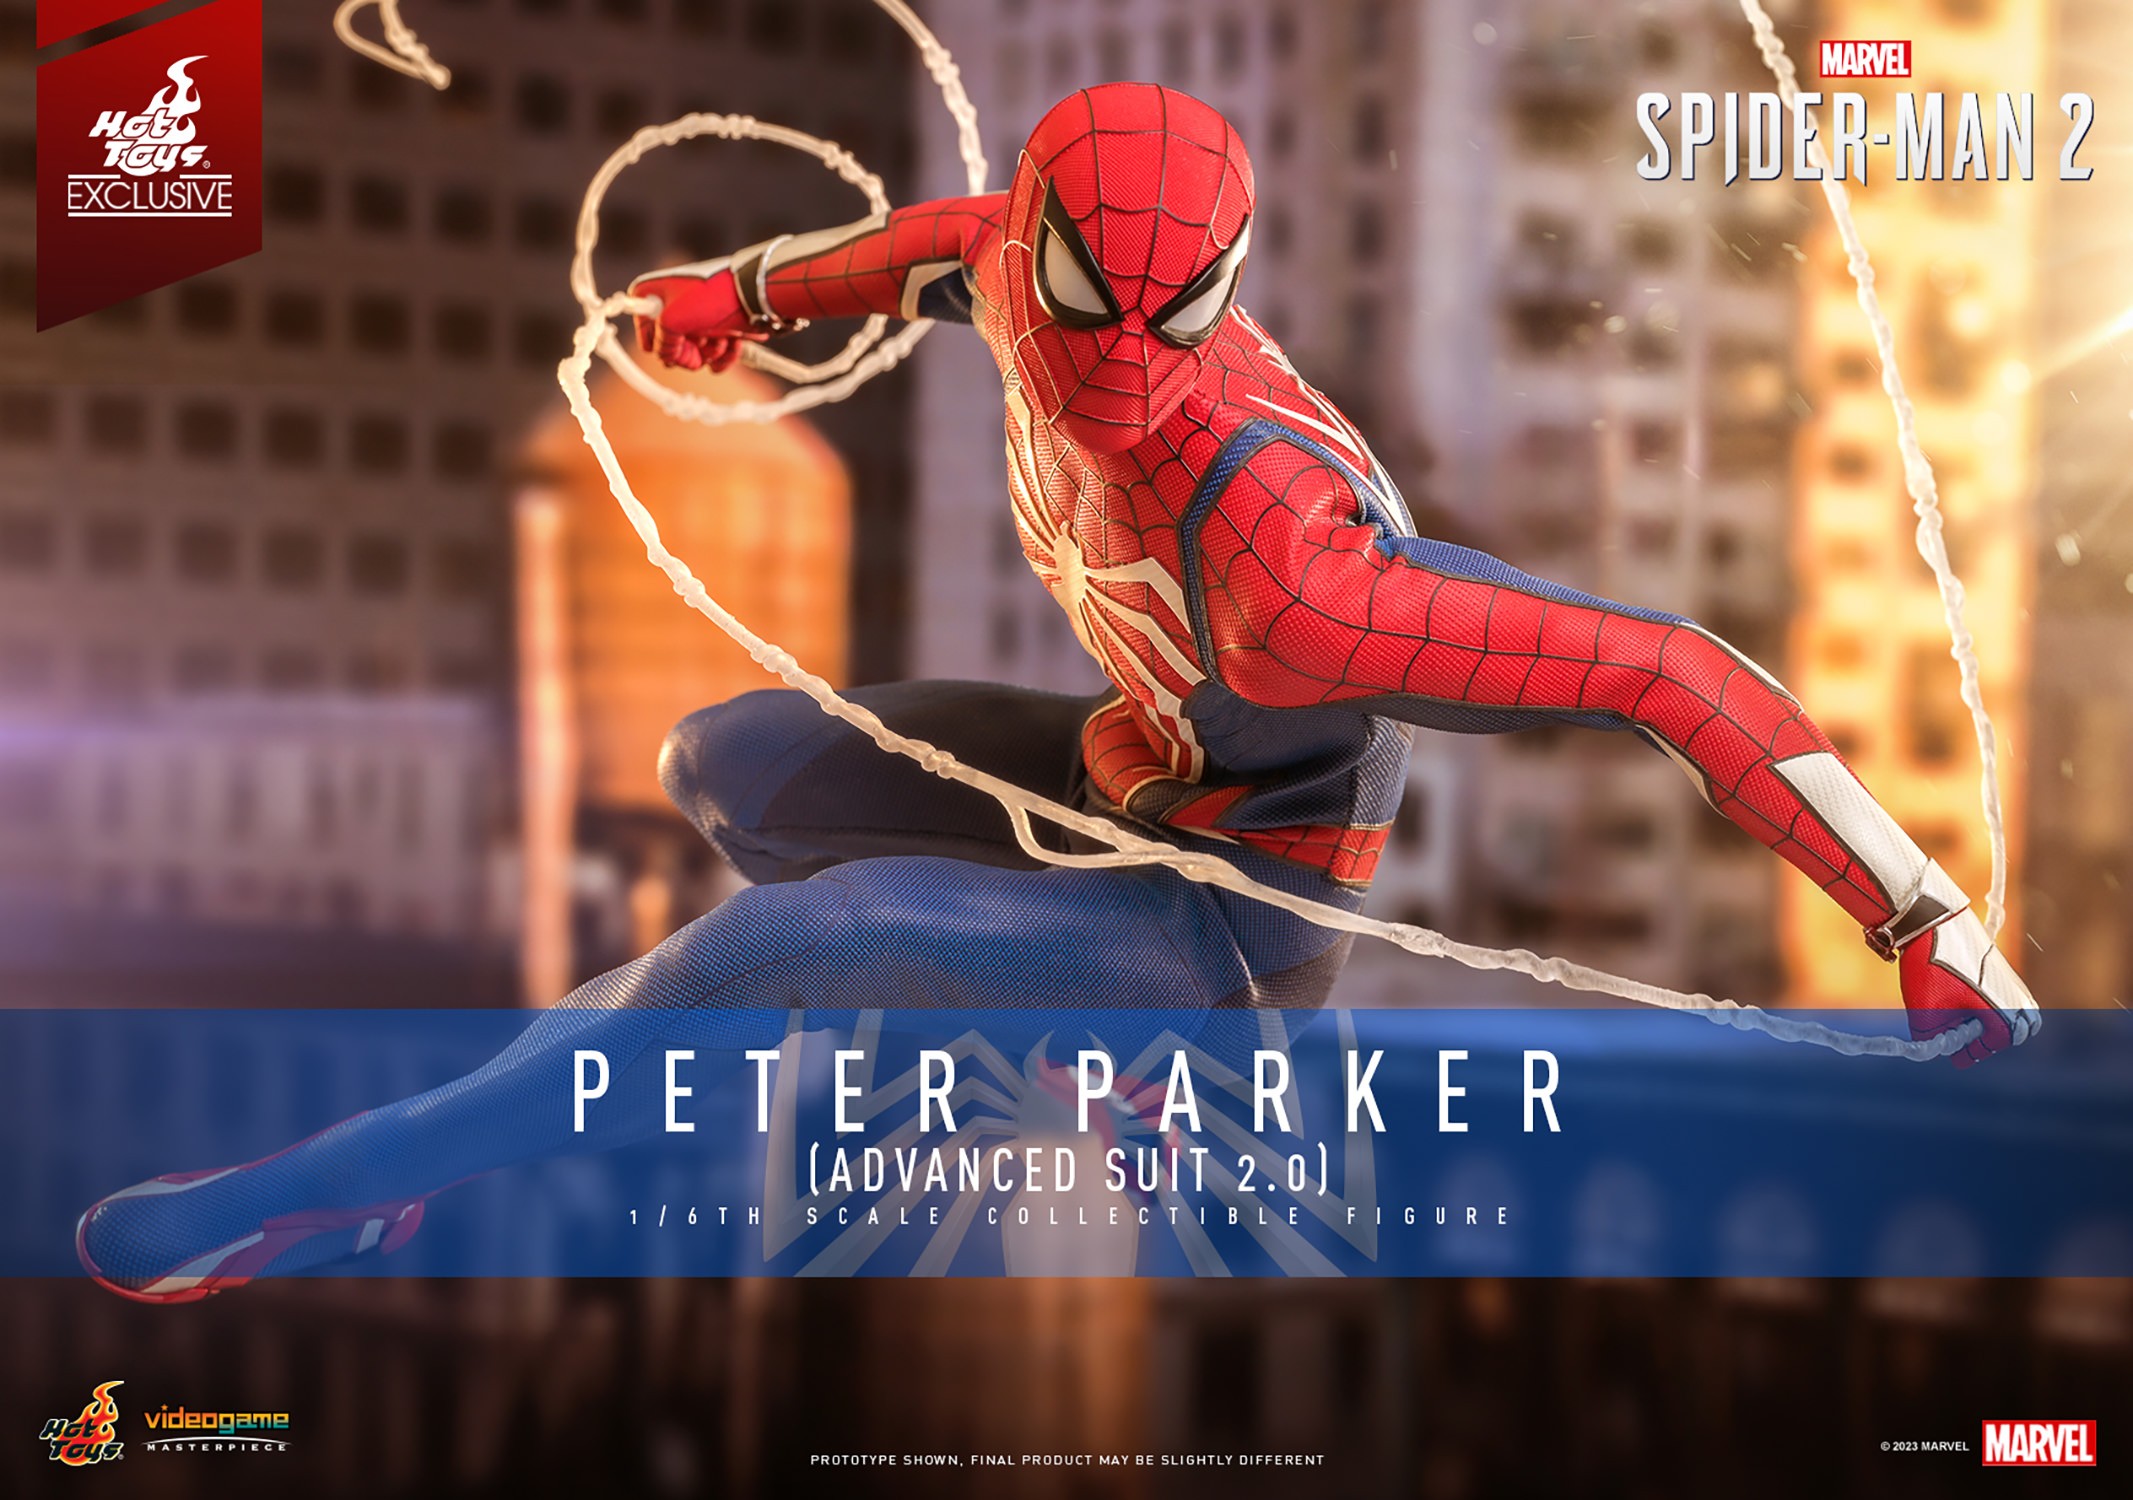 Peter Parker (Advanced Suit 2.0) Sixth Figure by Hot | Sideshow Collectibles